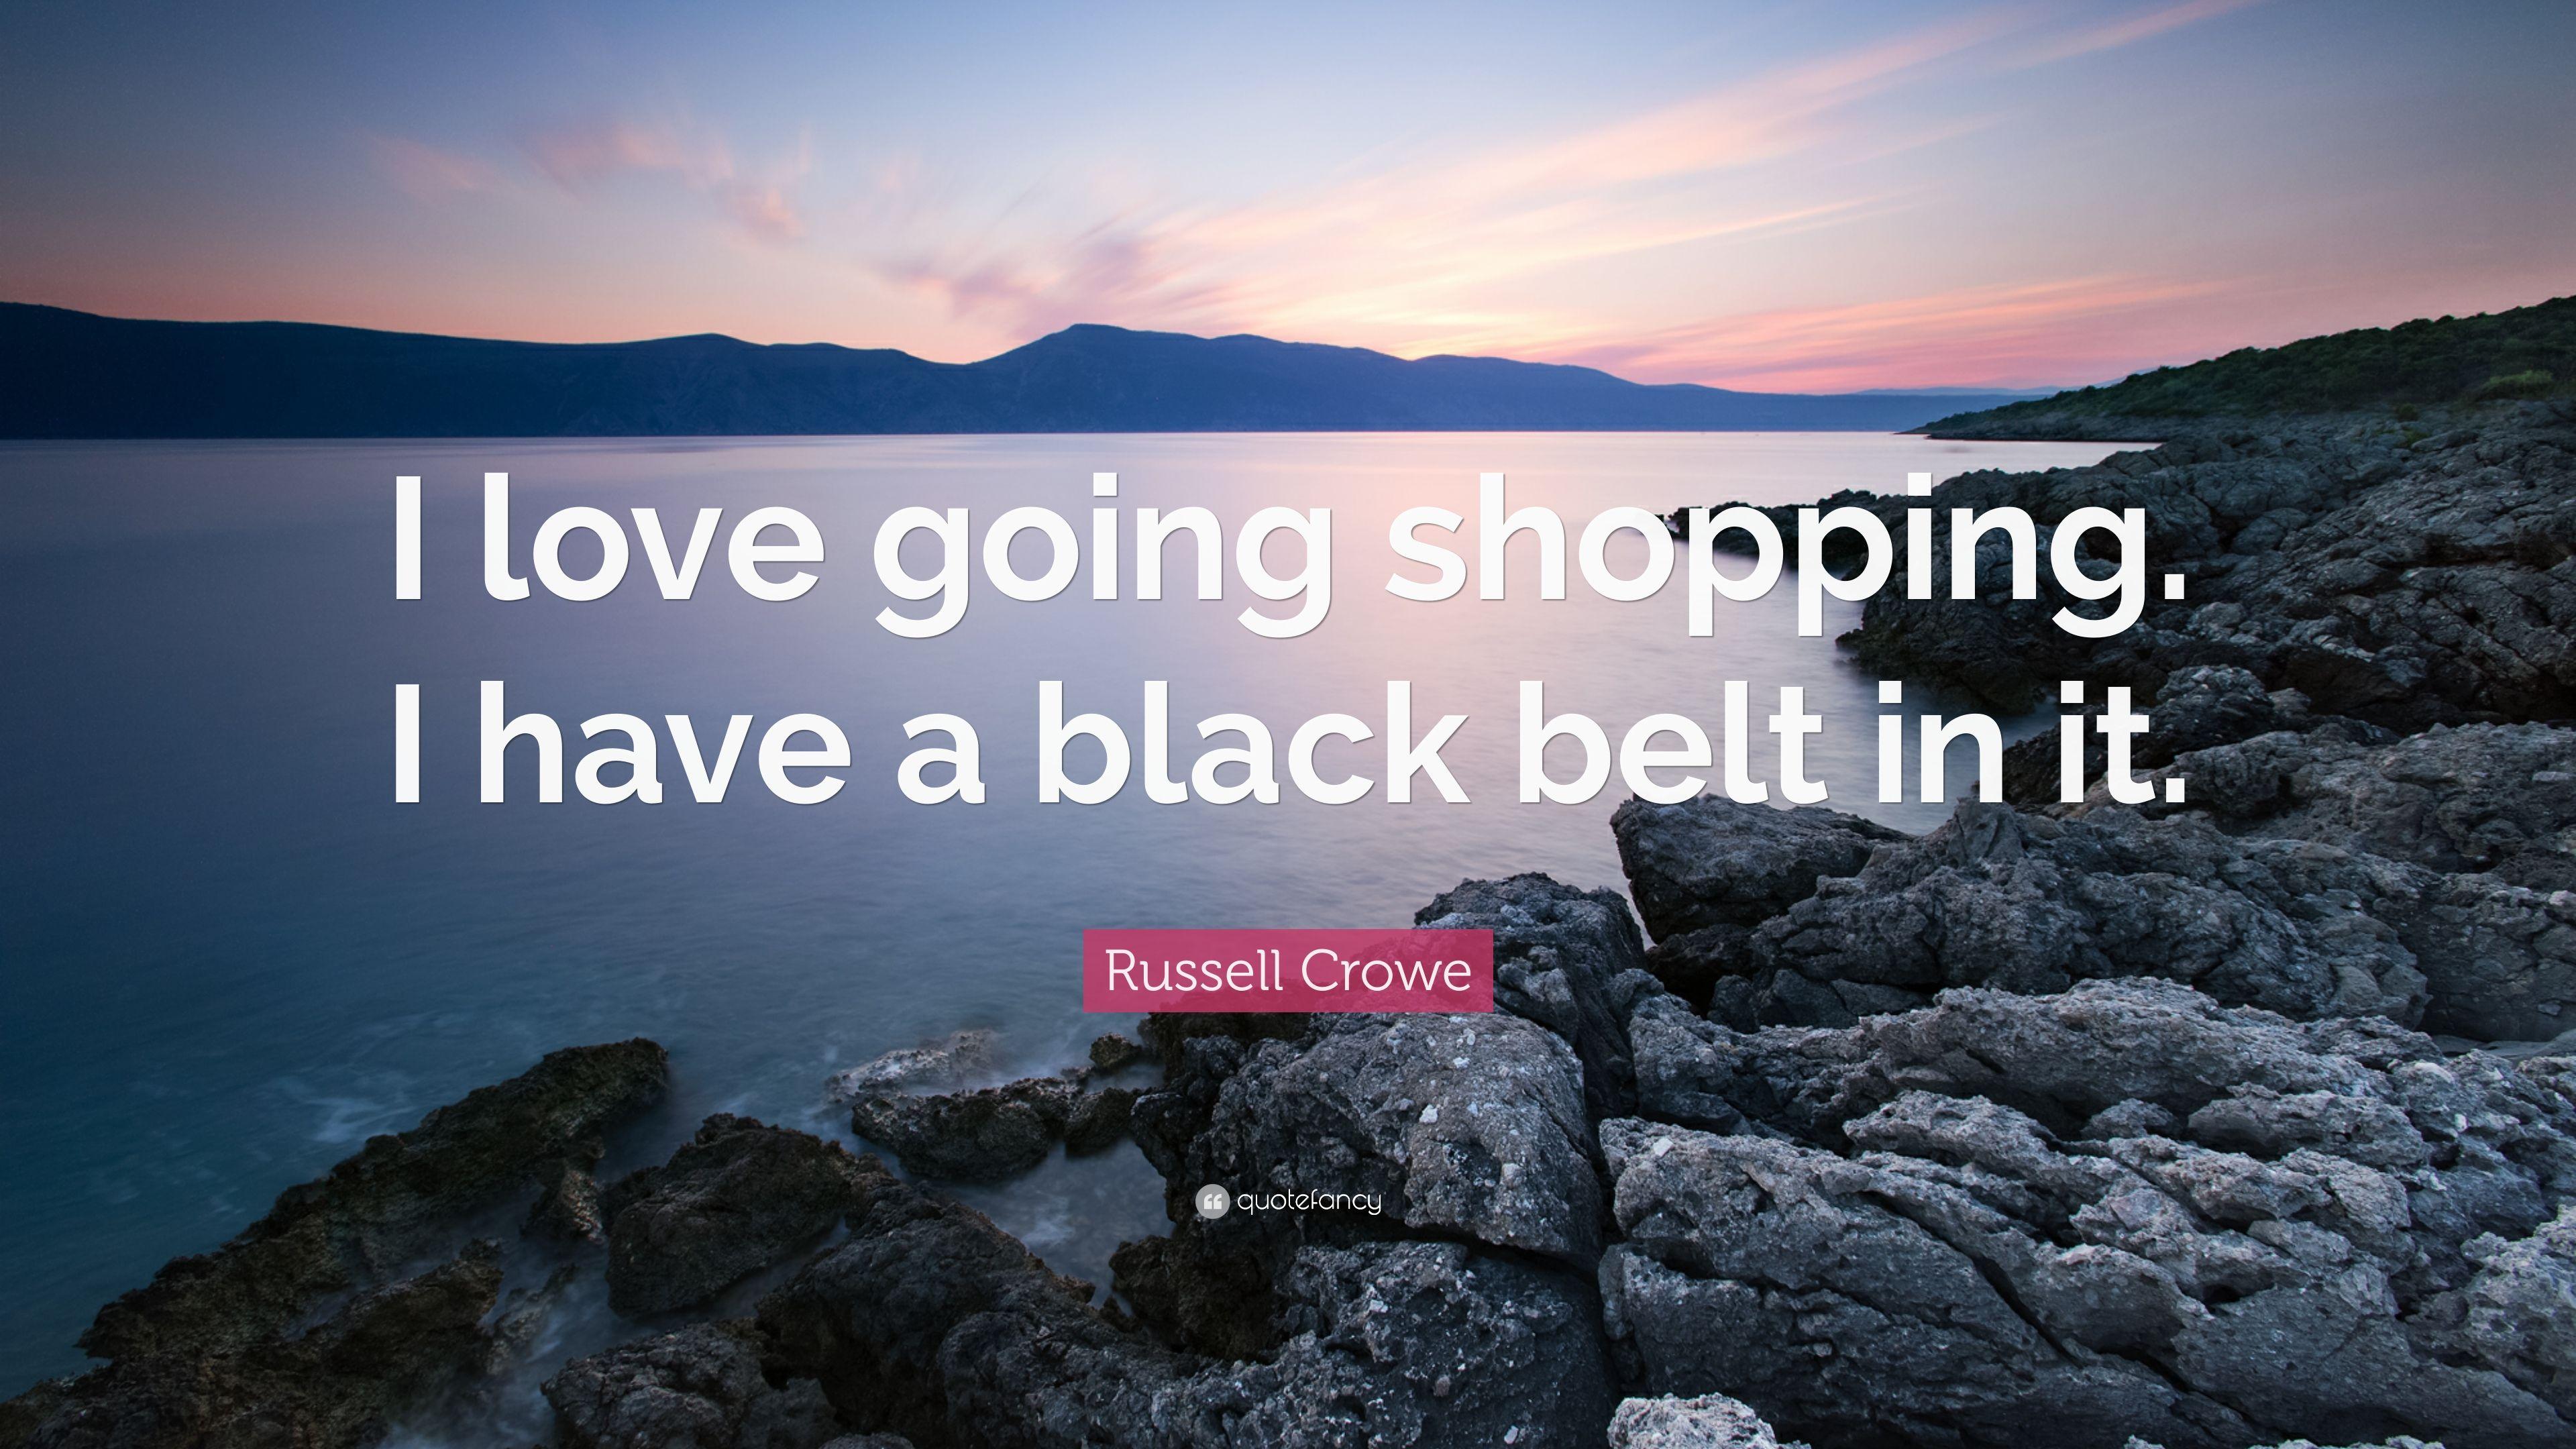 Russell Crowe Quote: “I love going shopping. I have a black belt